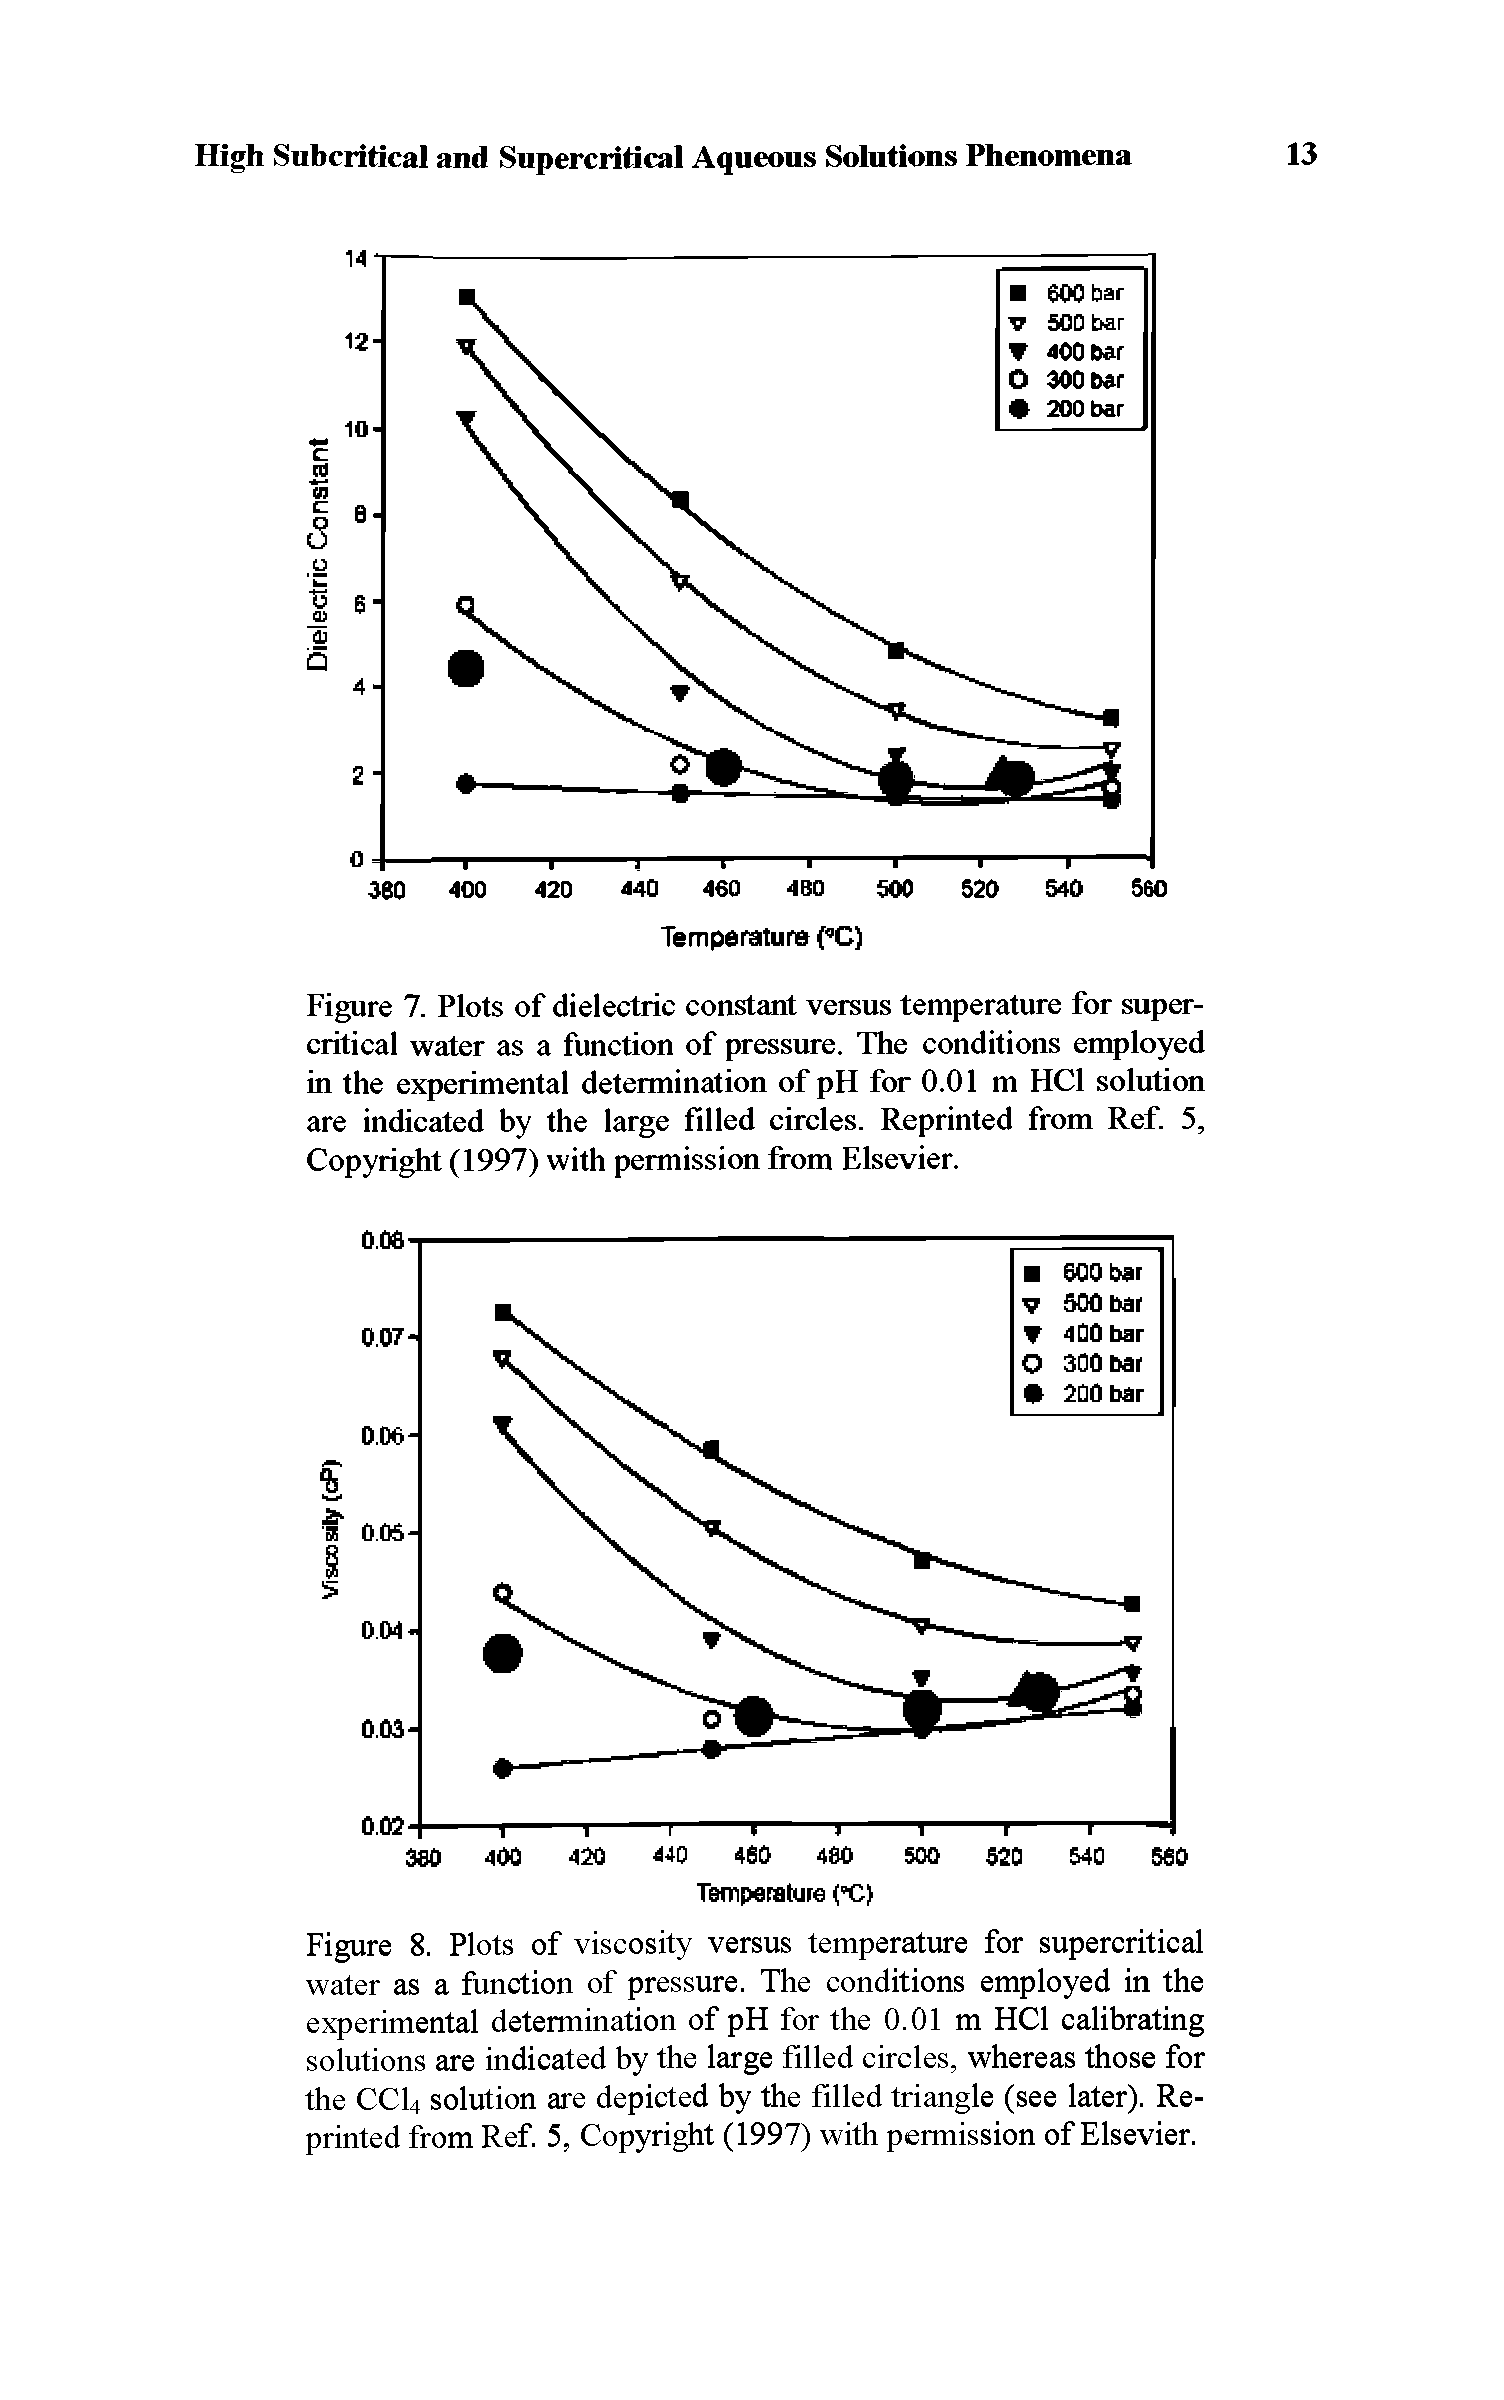 Figure 7. Plots of dielectric constant versus temperature for supercritical water as a function of pressure. The conditions employed in the experimental determination of pH for 0.01 m HCl solution are indicated by the large filled circles. Reprinted from Ref. 5, Copyright (1997) with permission from Elsevier.